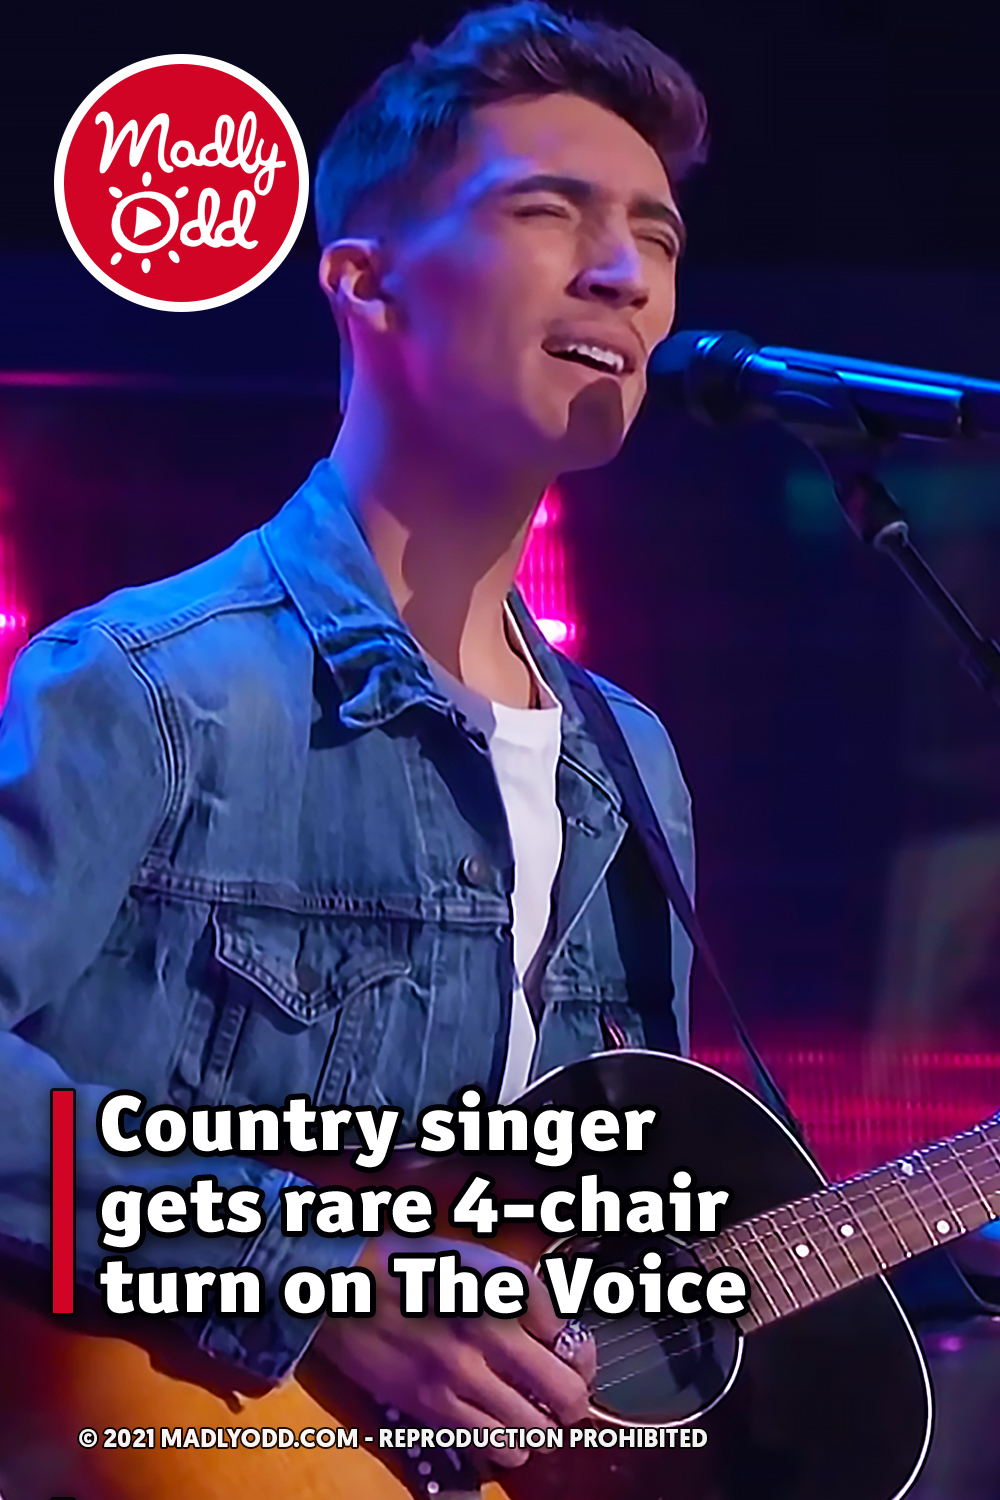 Country singer gets rare 4-chair turn on The Voice